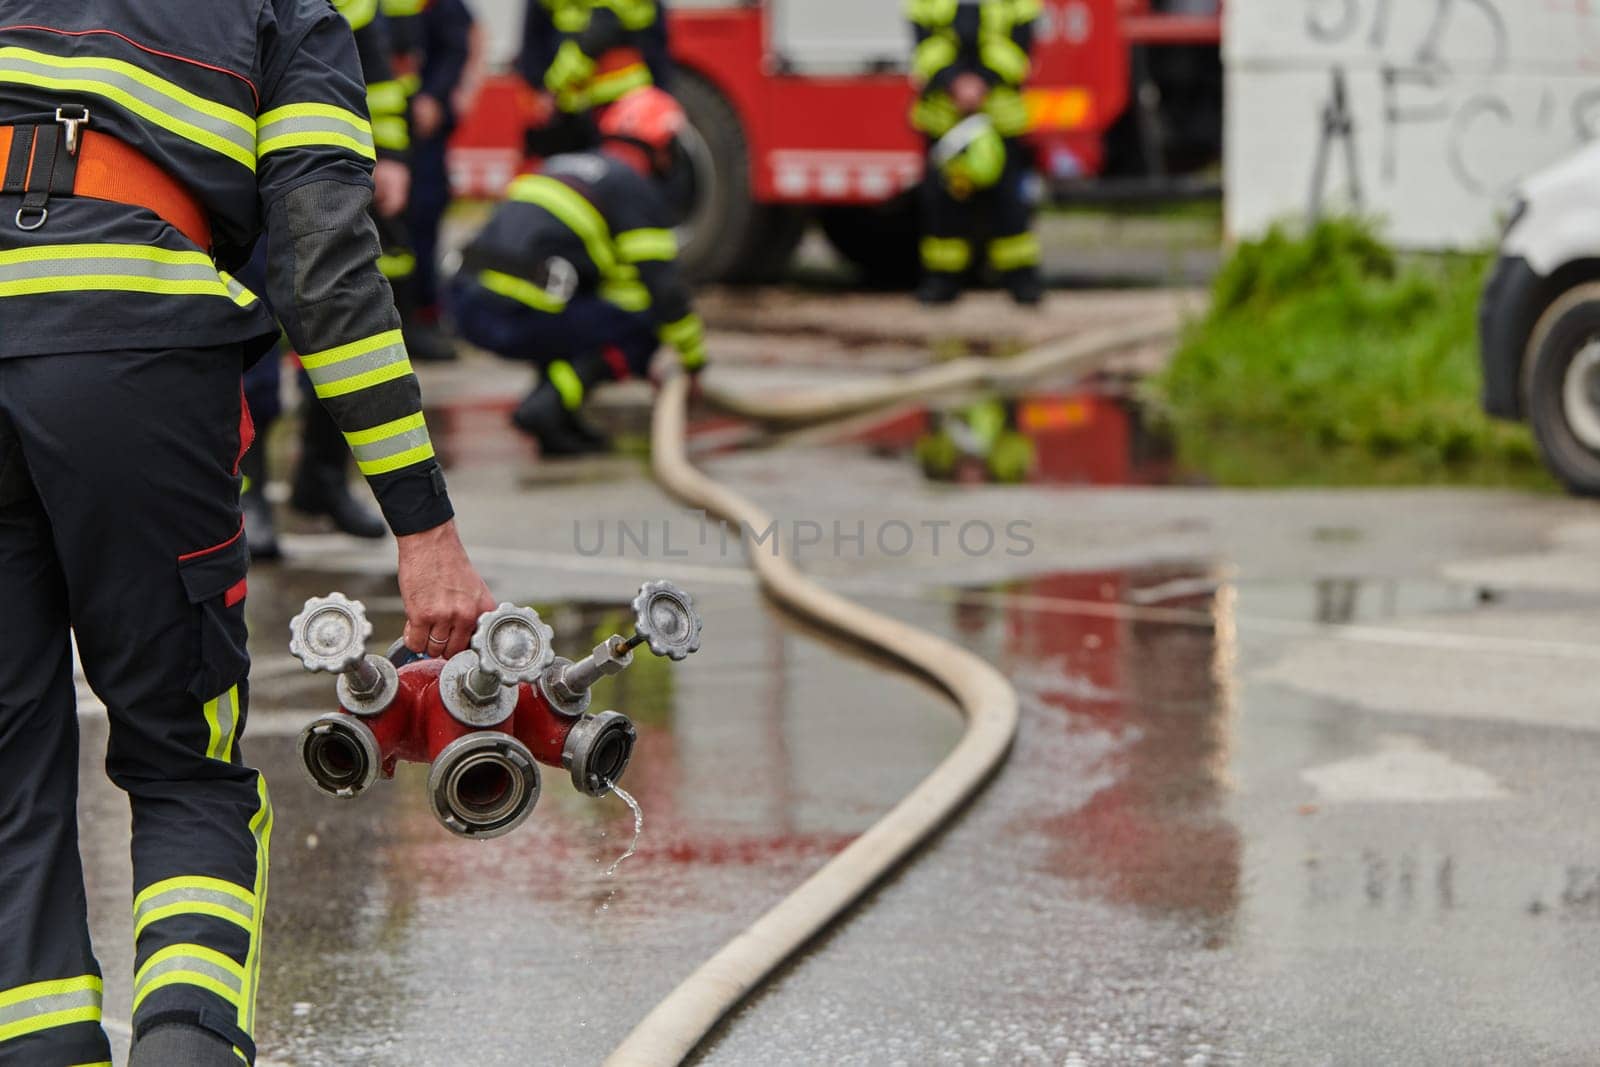 In a dynamic display of synchronized teamwork, firefighters hustle to carry, connect, and deploy firefighting hoses with precision, showcasing their intensive training and readiness for challenging and high-risk situations ahead.